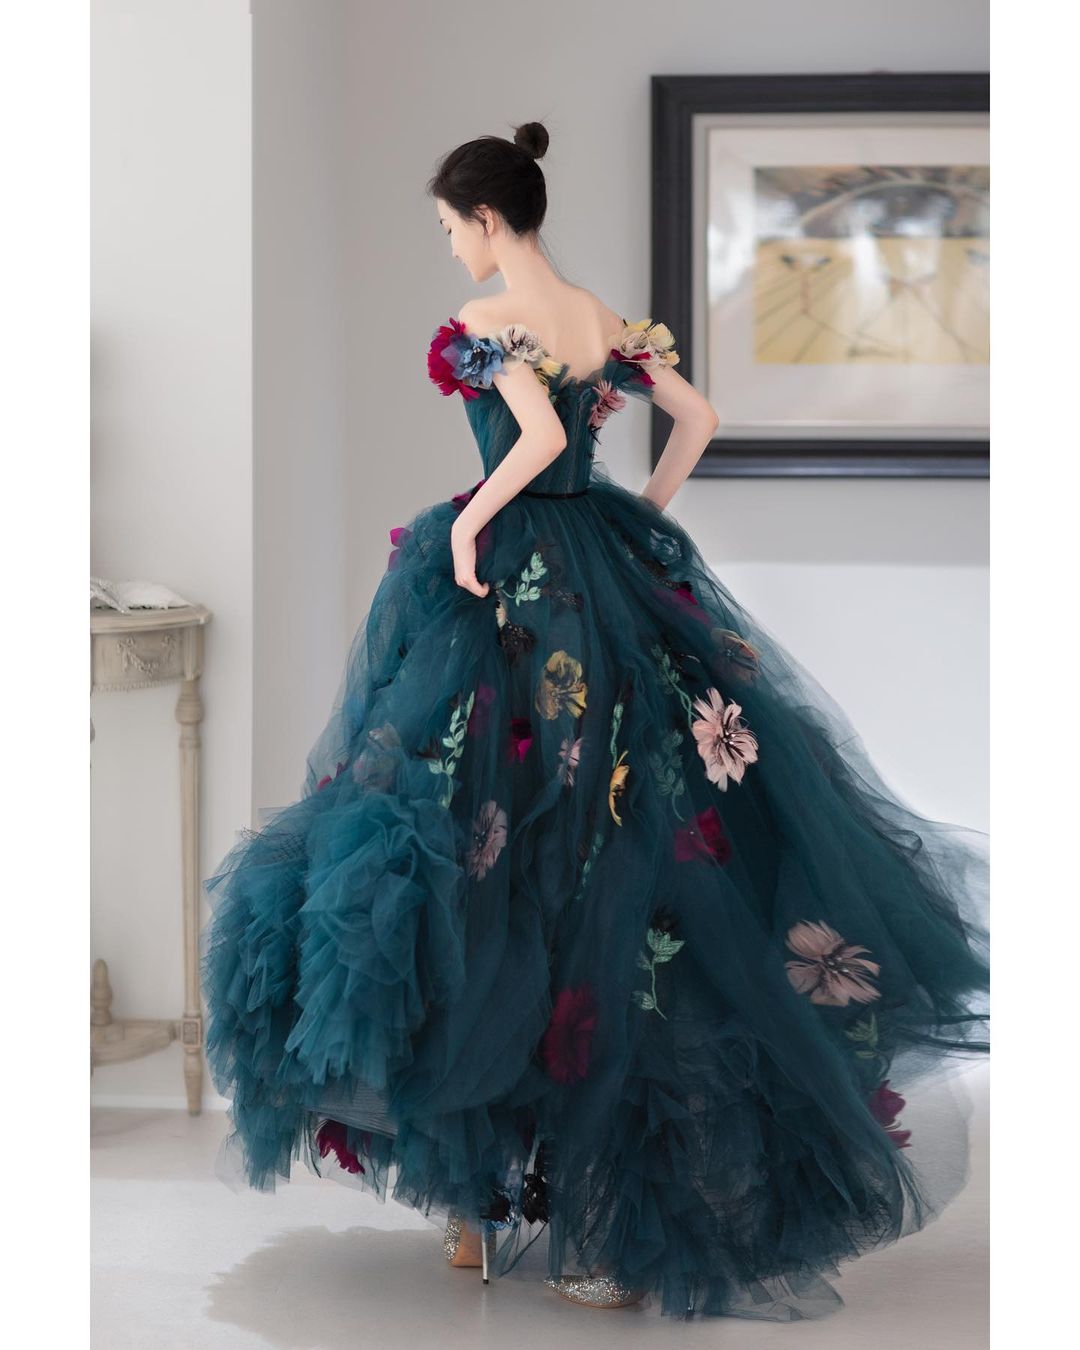 Off-Shoulder Dark Blue Sweetheart Tulle Dress Lush A-Line Floral Dresses 3D Flowered Evening Dress 2021 Ever Pretty Plus Size Sexy Wedding Dresses BlissGown 